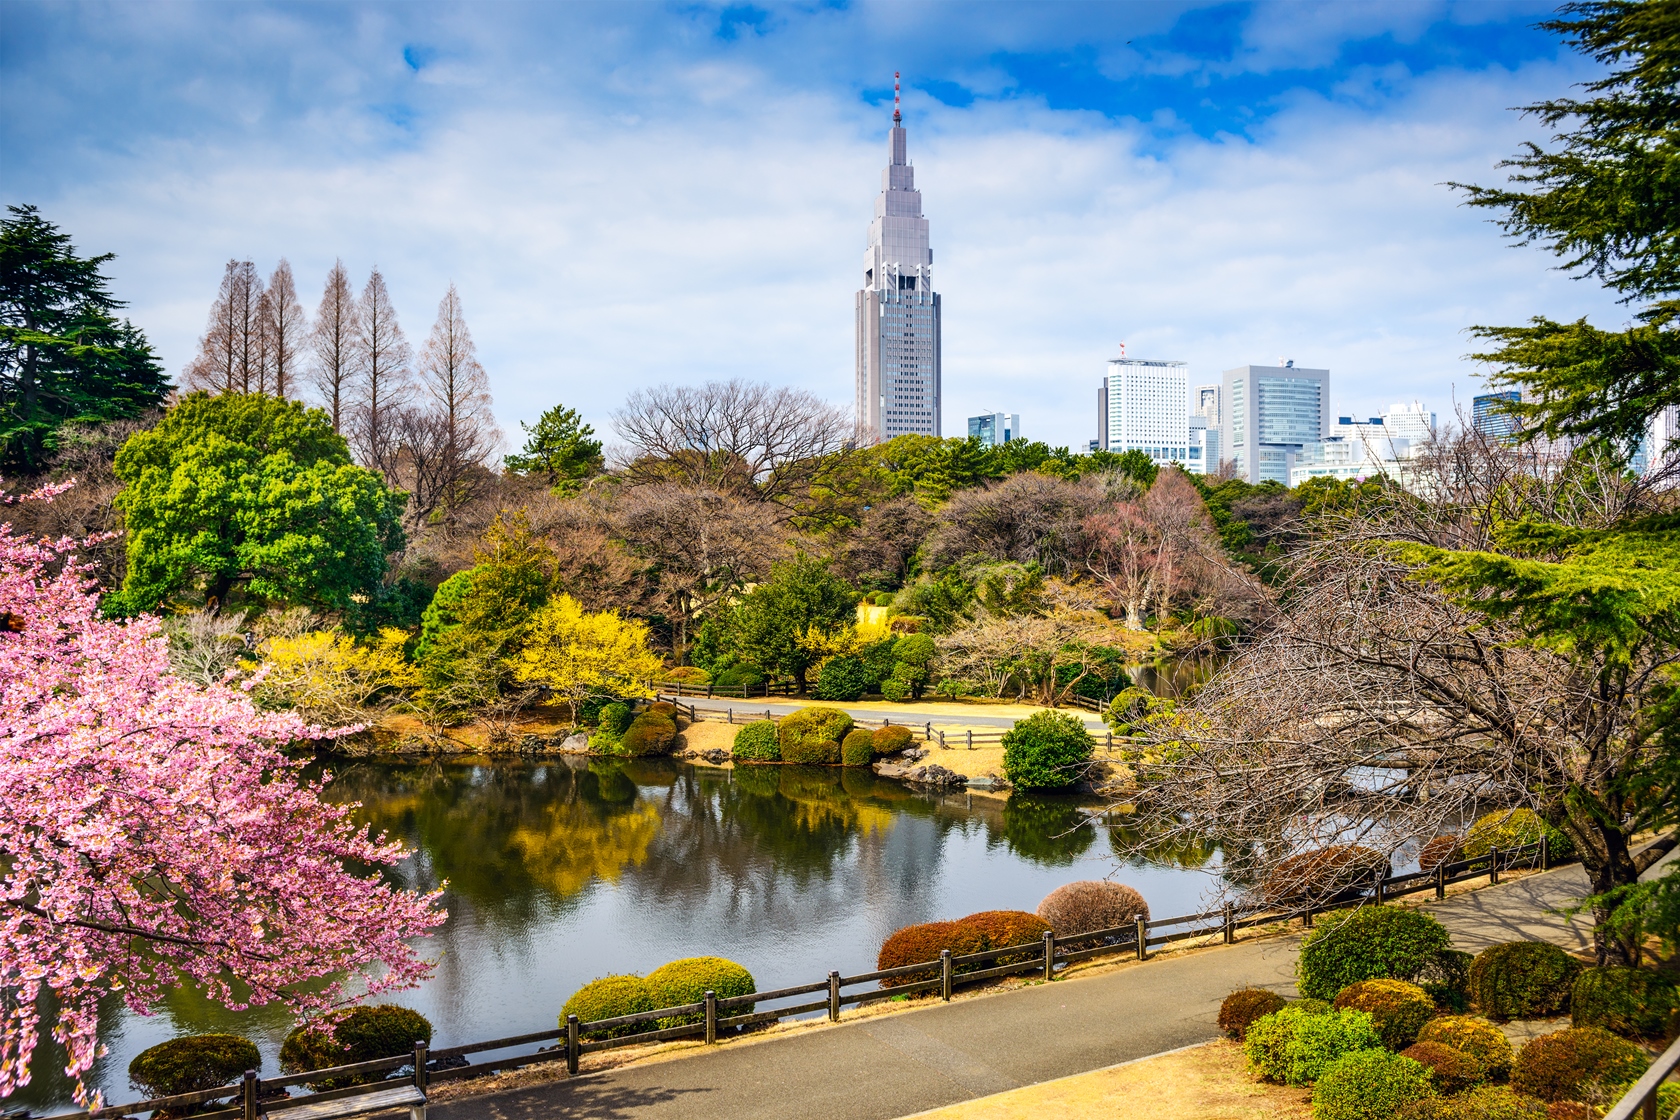 A lake in Shinjuku Gyoen, one of Tokyo's largest and most popular parks, located just a short walk from Shinjuku Station with the Tokyo skyline in the background